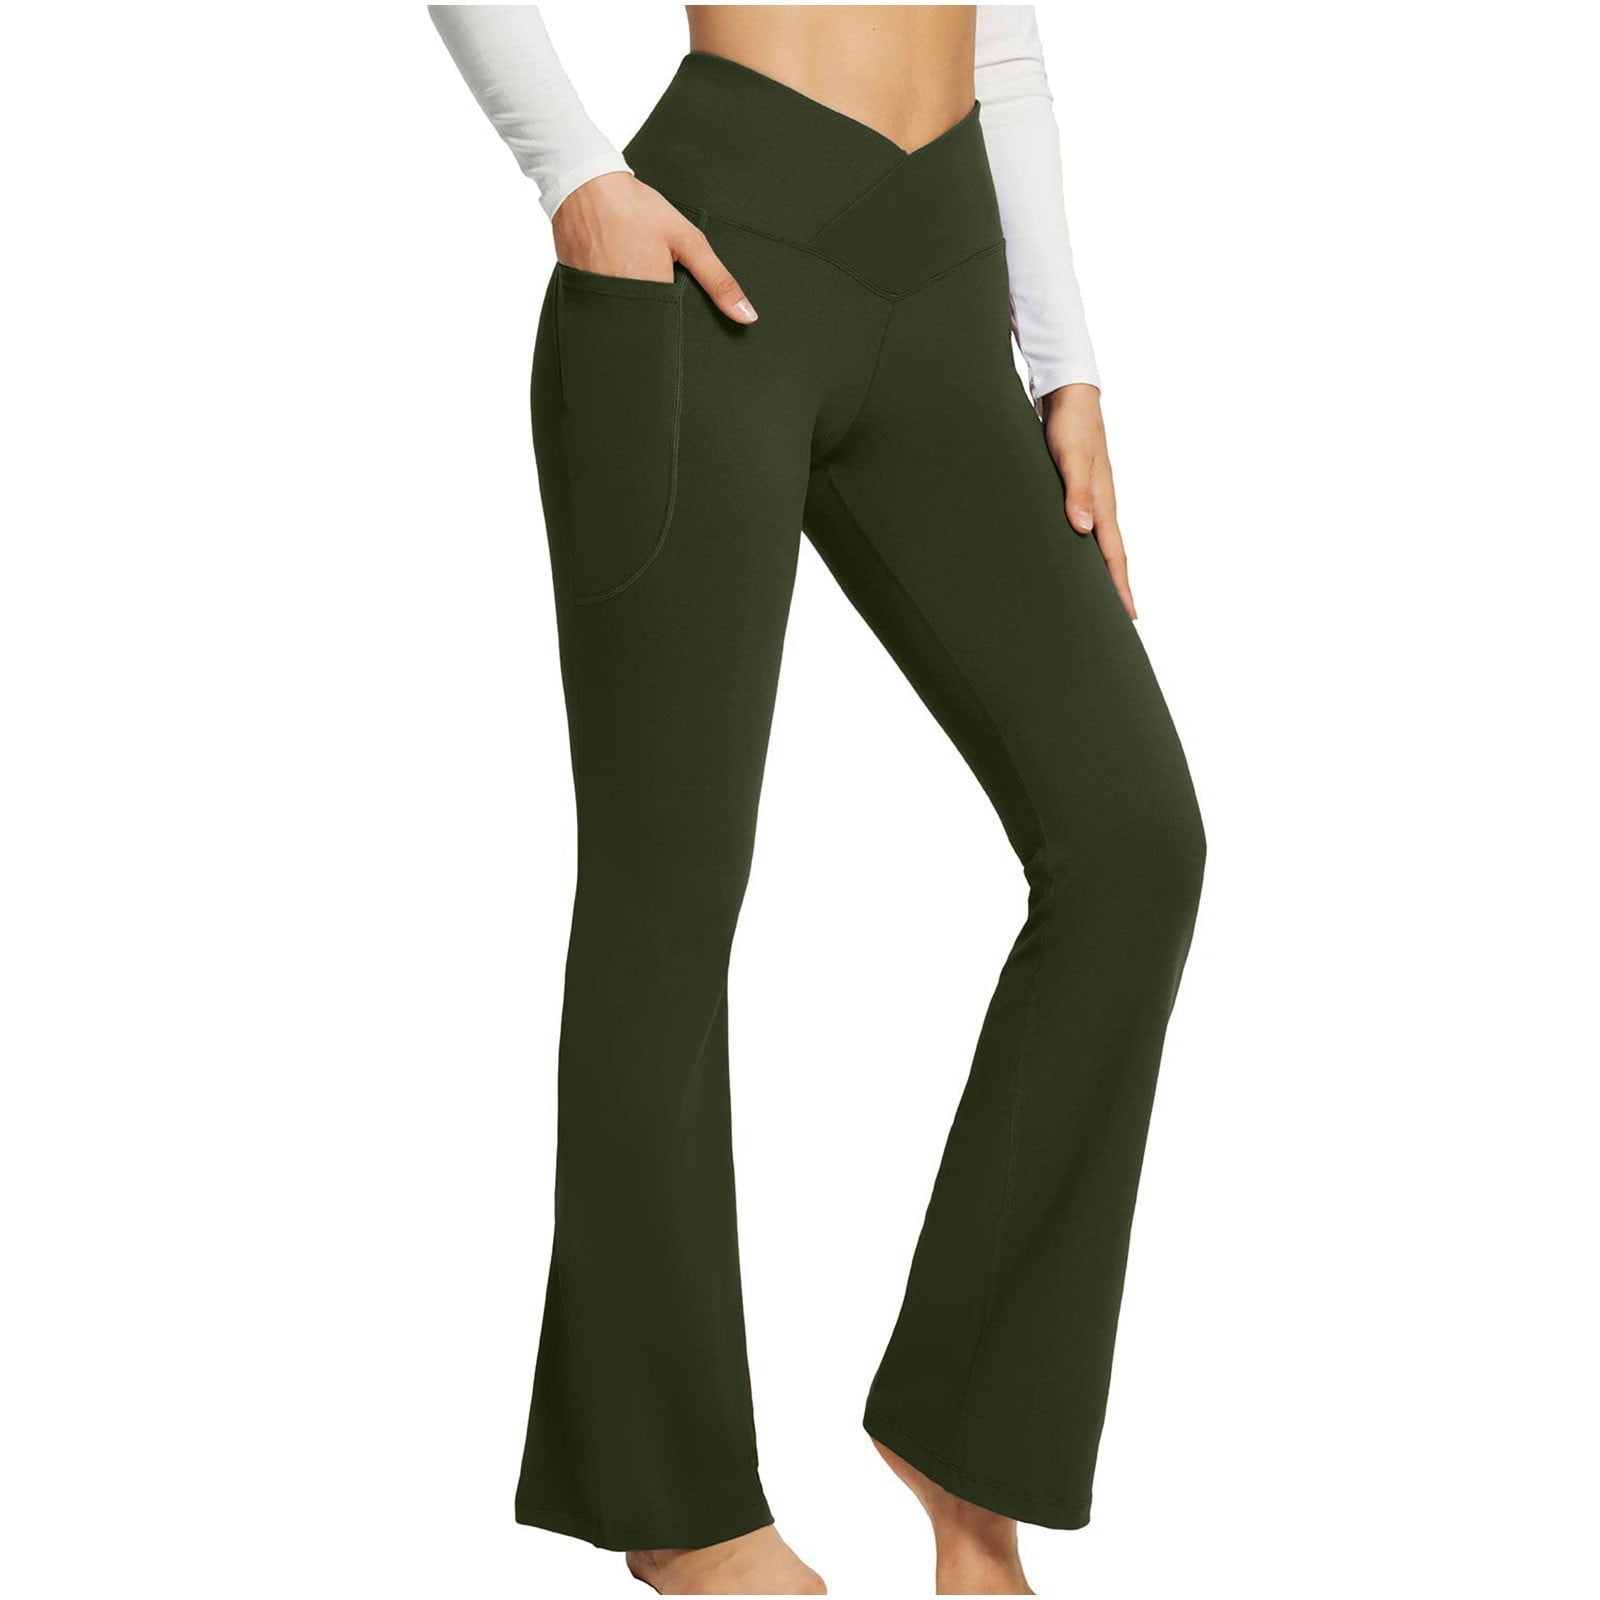 Hot Sales! Women's Pants, Yoga Pants with Pockets for Women